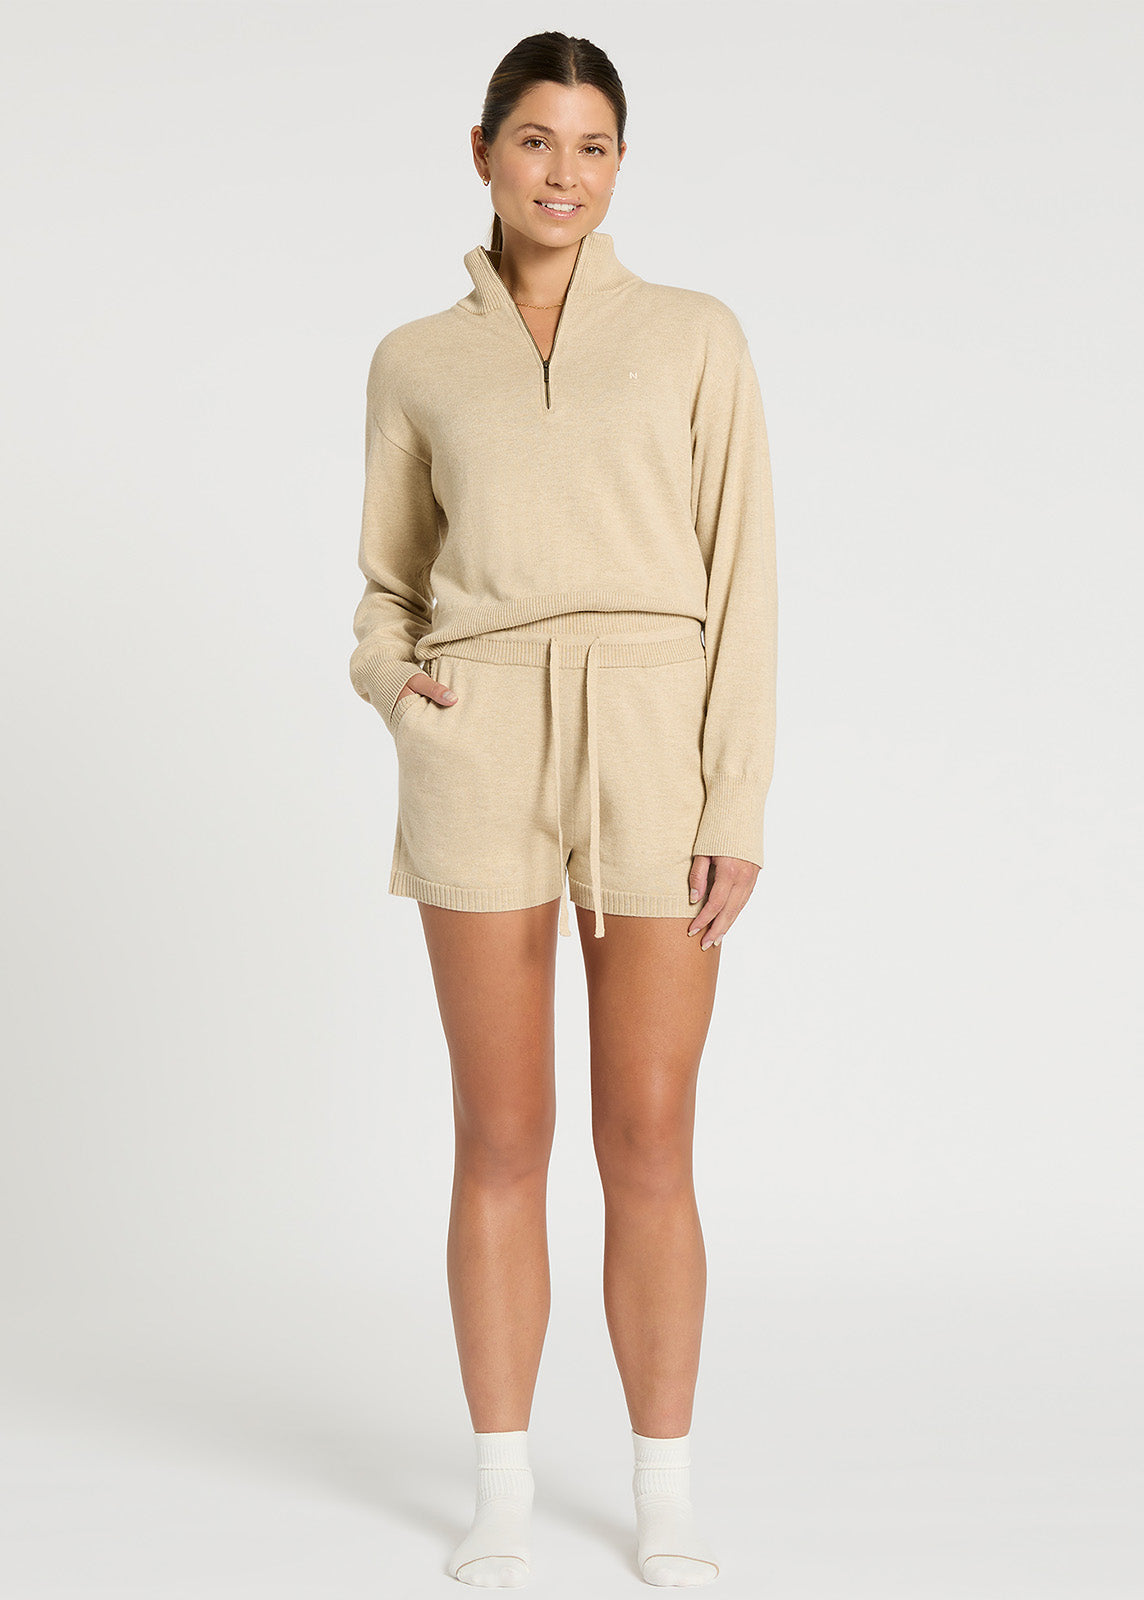 Model stood facing forward wearing oatmeal coloured knit shorts with mid-thigh length, pockets and waistband with drawstring detail with matching knit top tucked in.